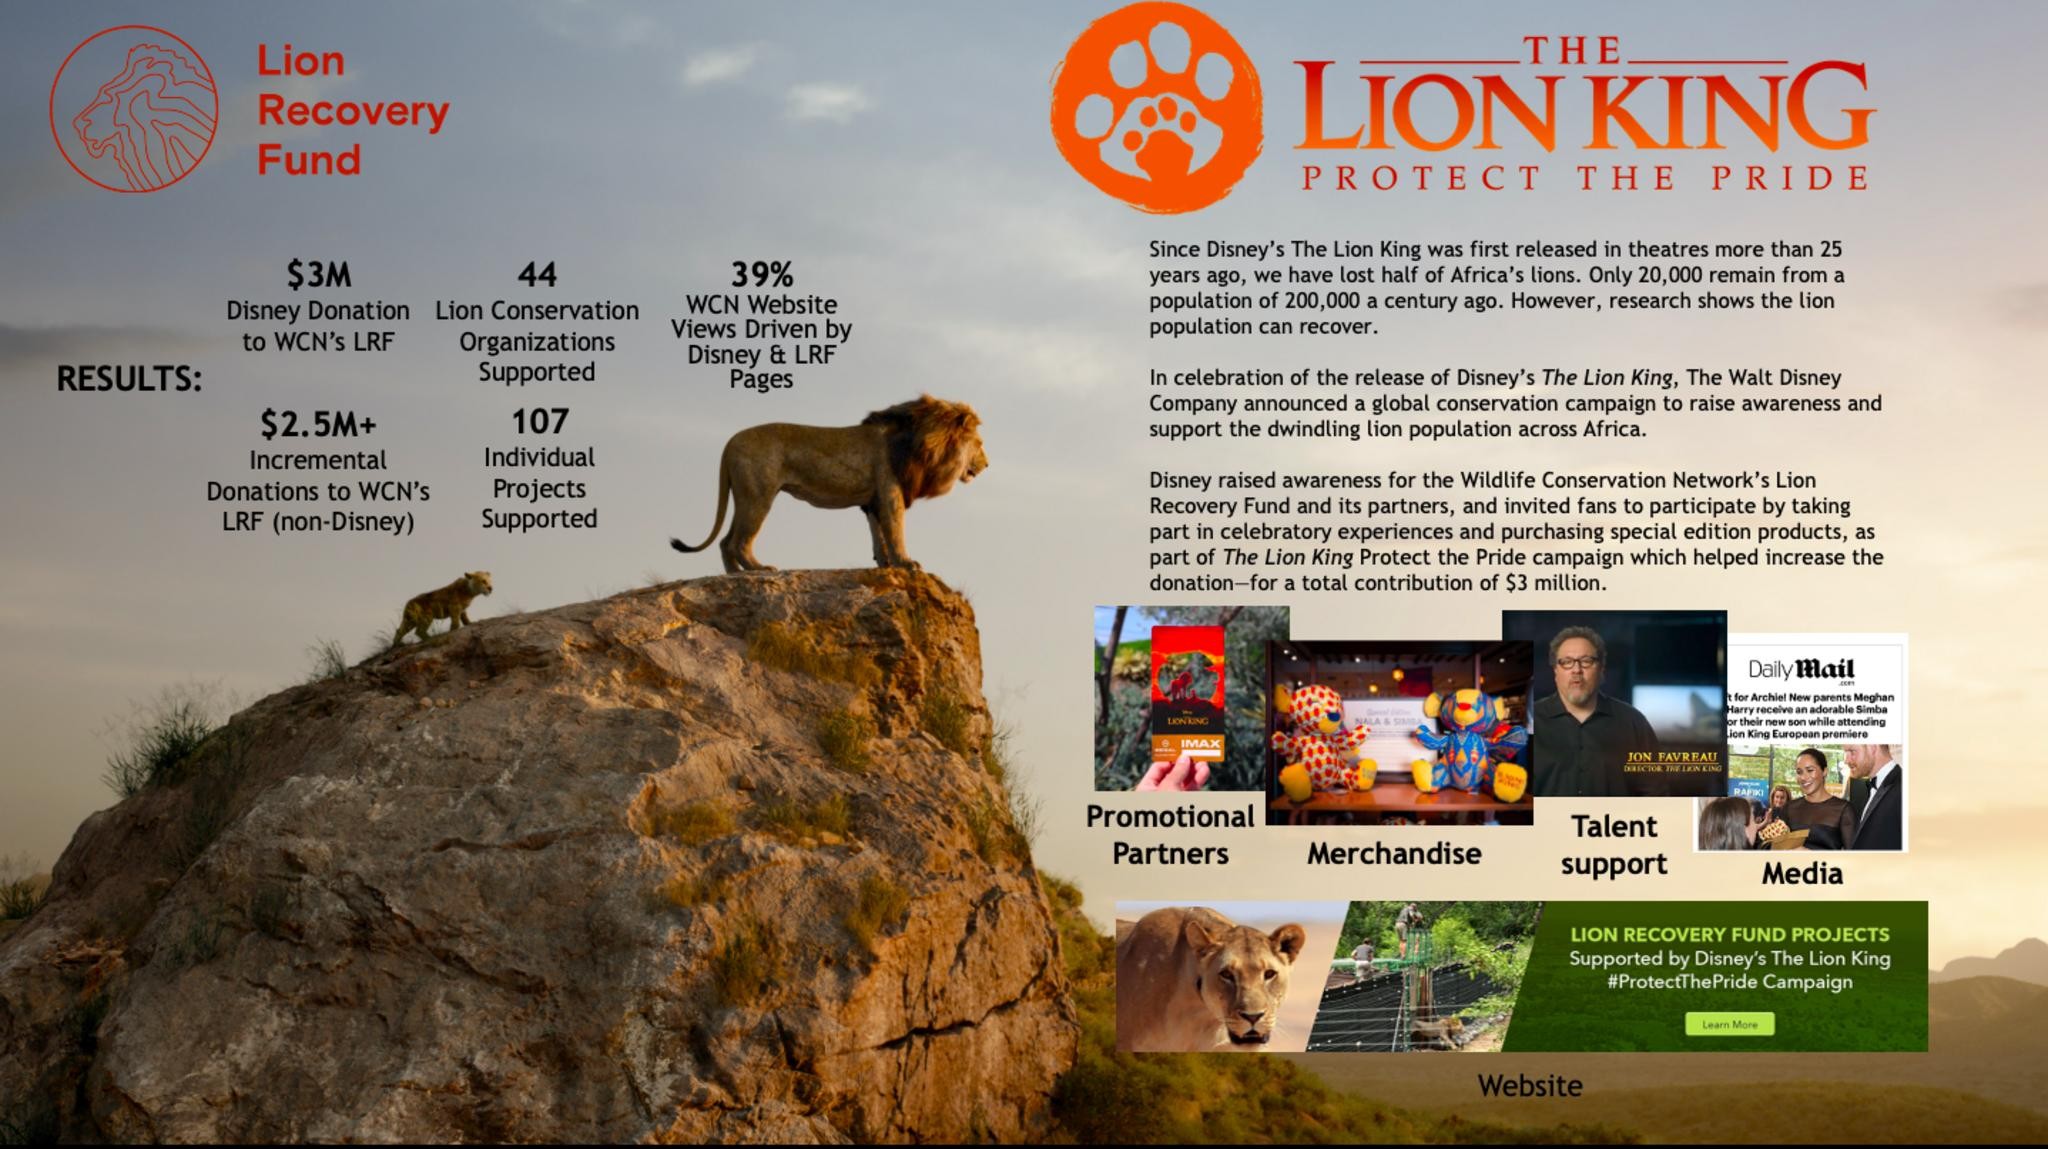 THE LION KING PROTECT THE PRIDE CAMPAIGN